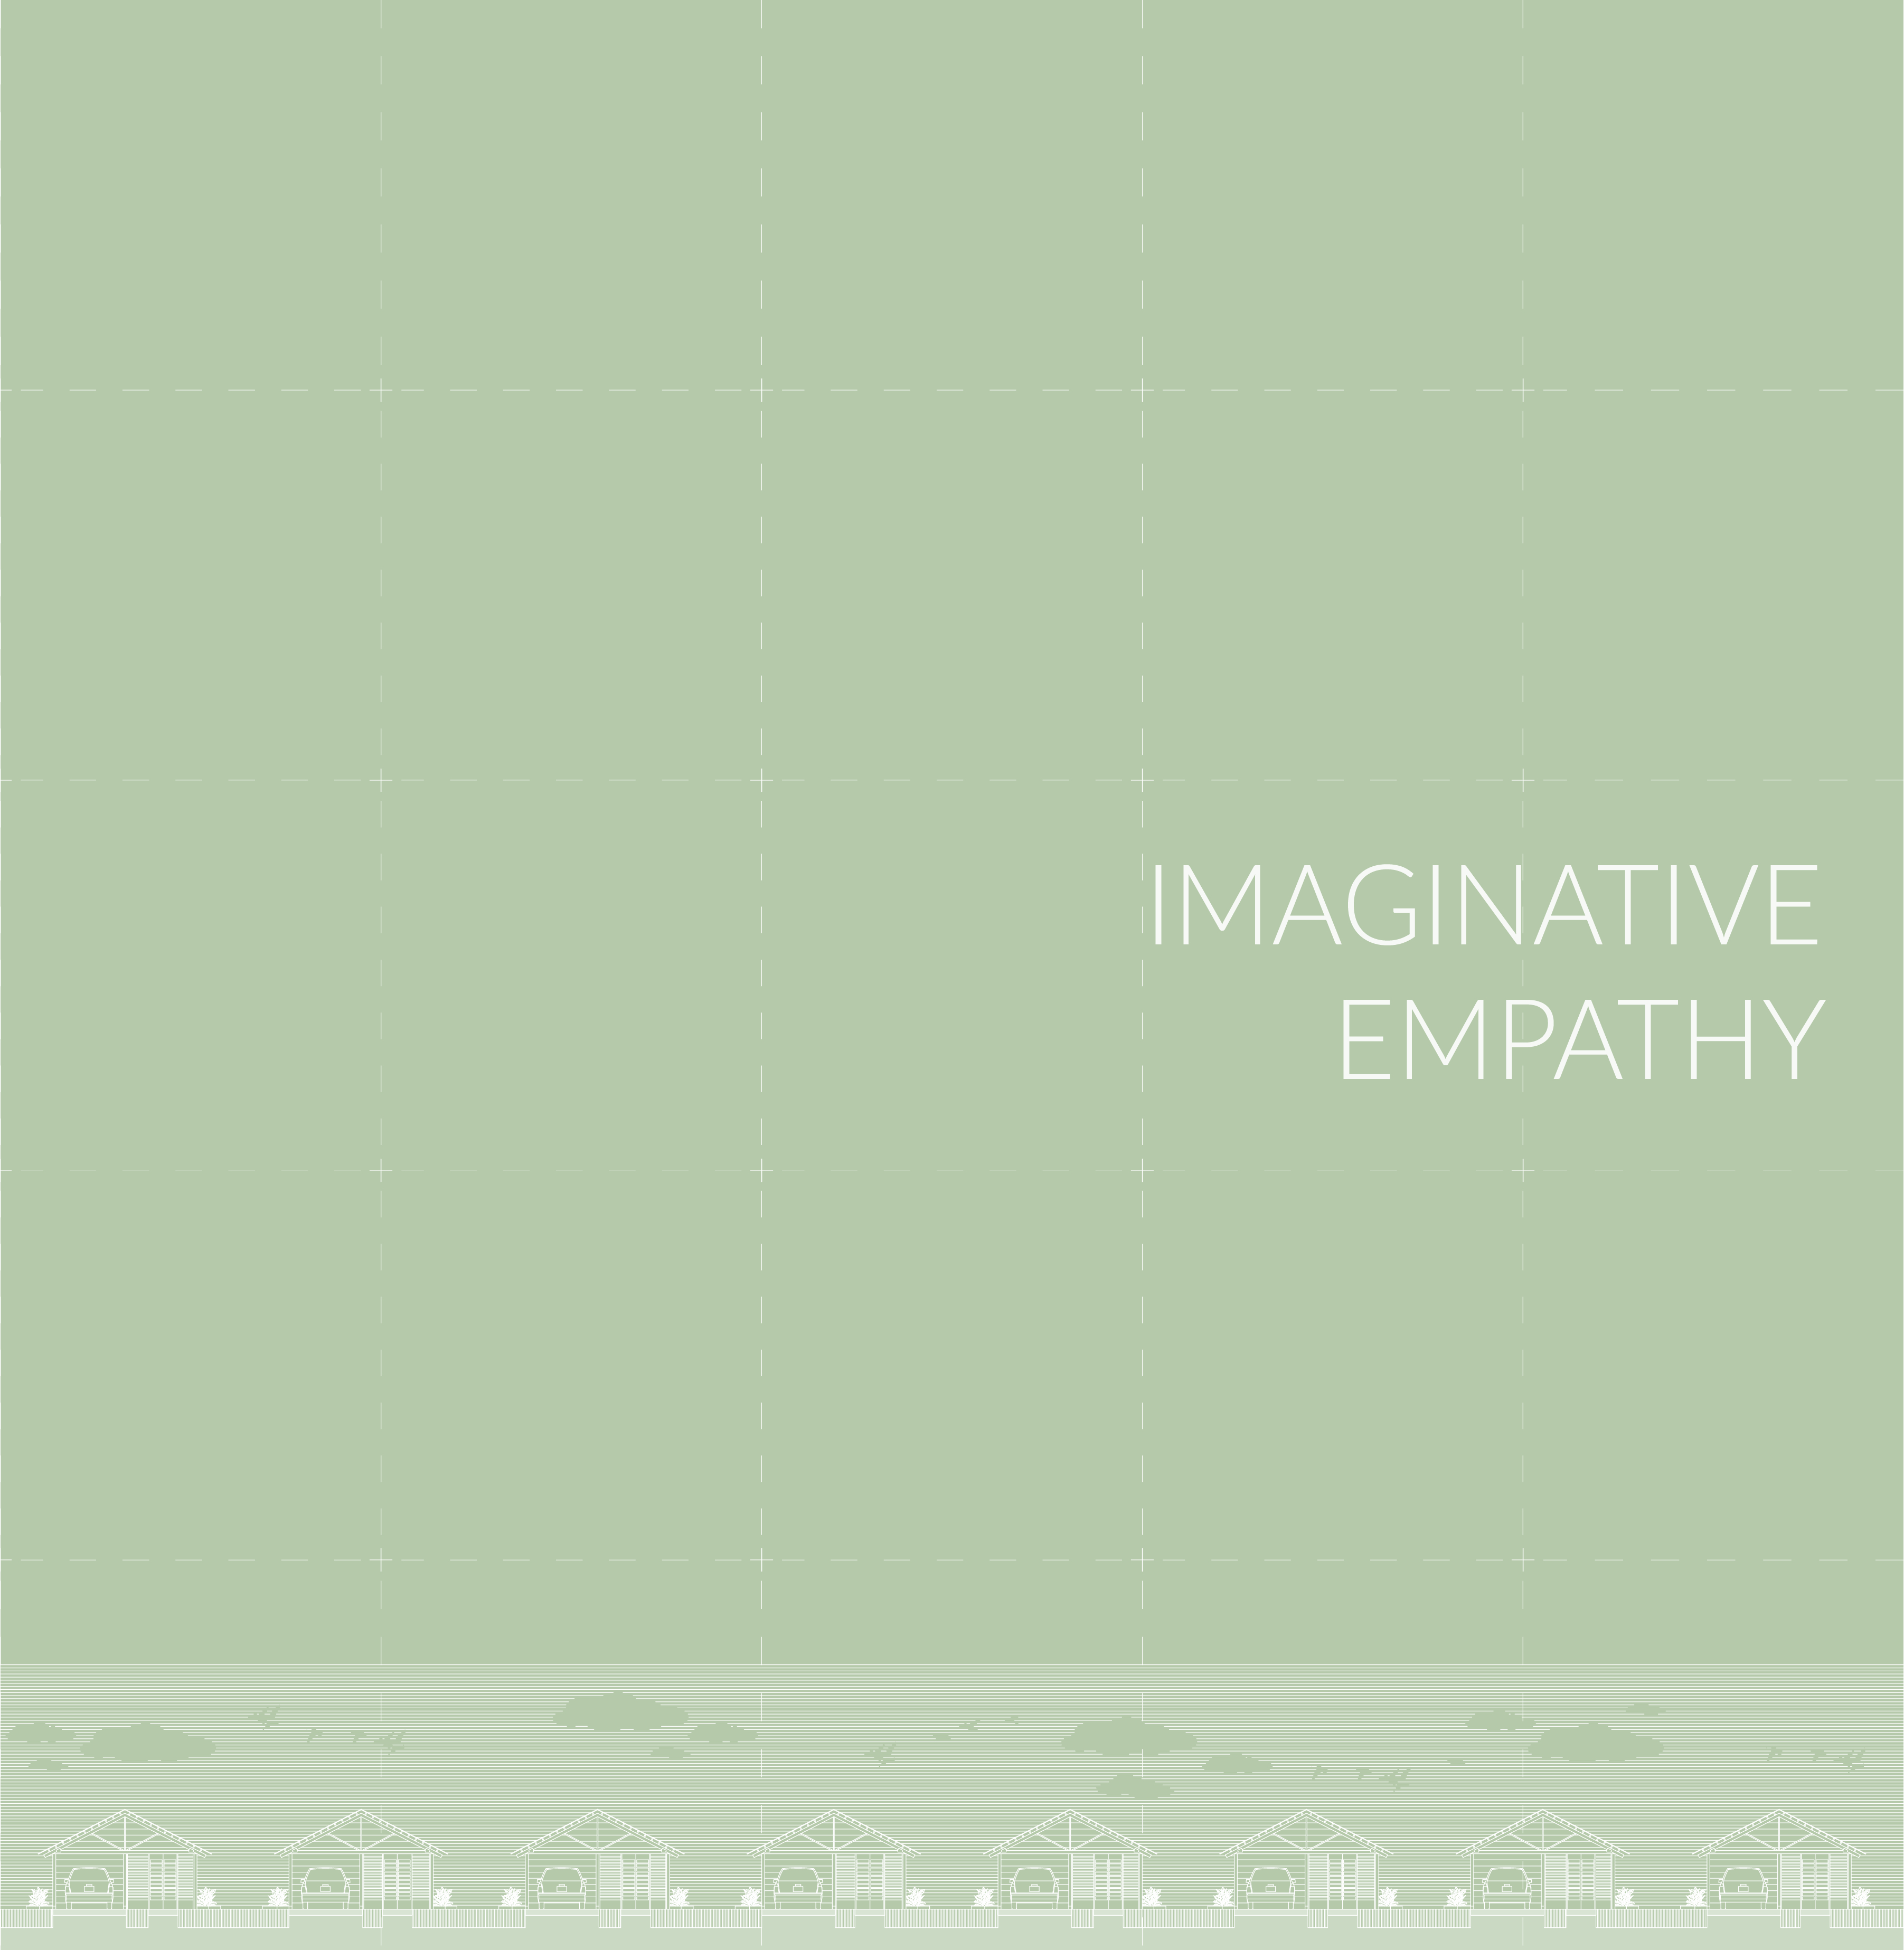 Imaginative Empathy   (click for a larger preview)